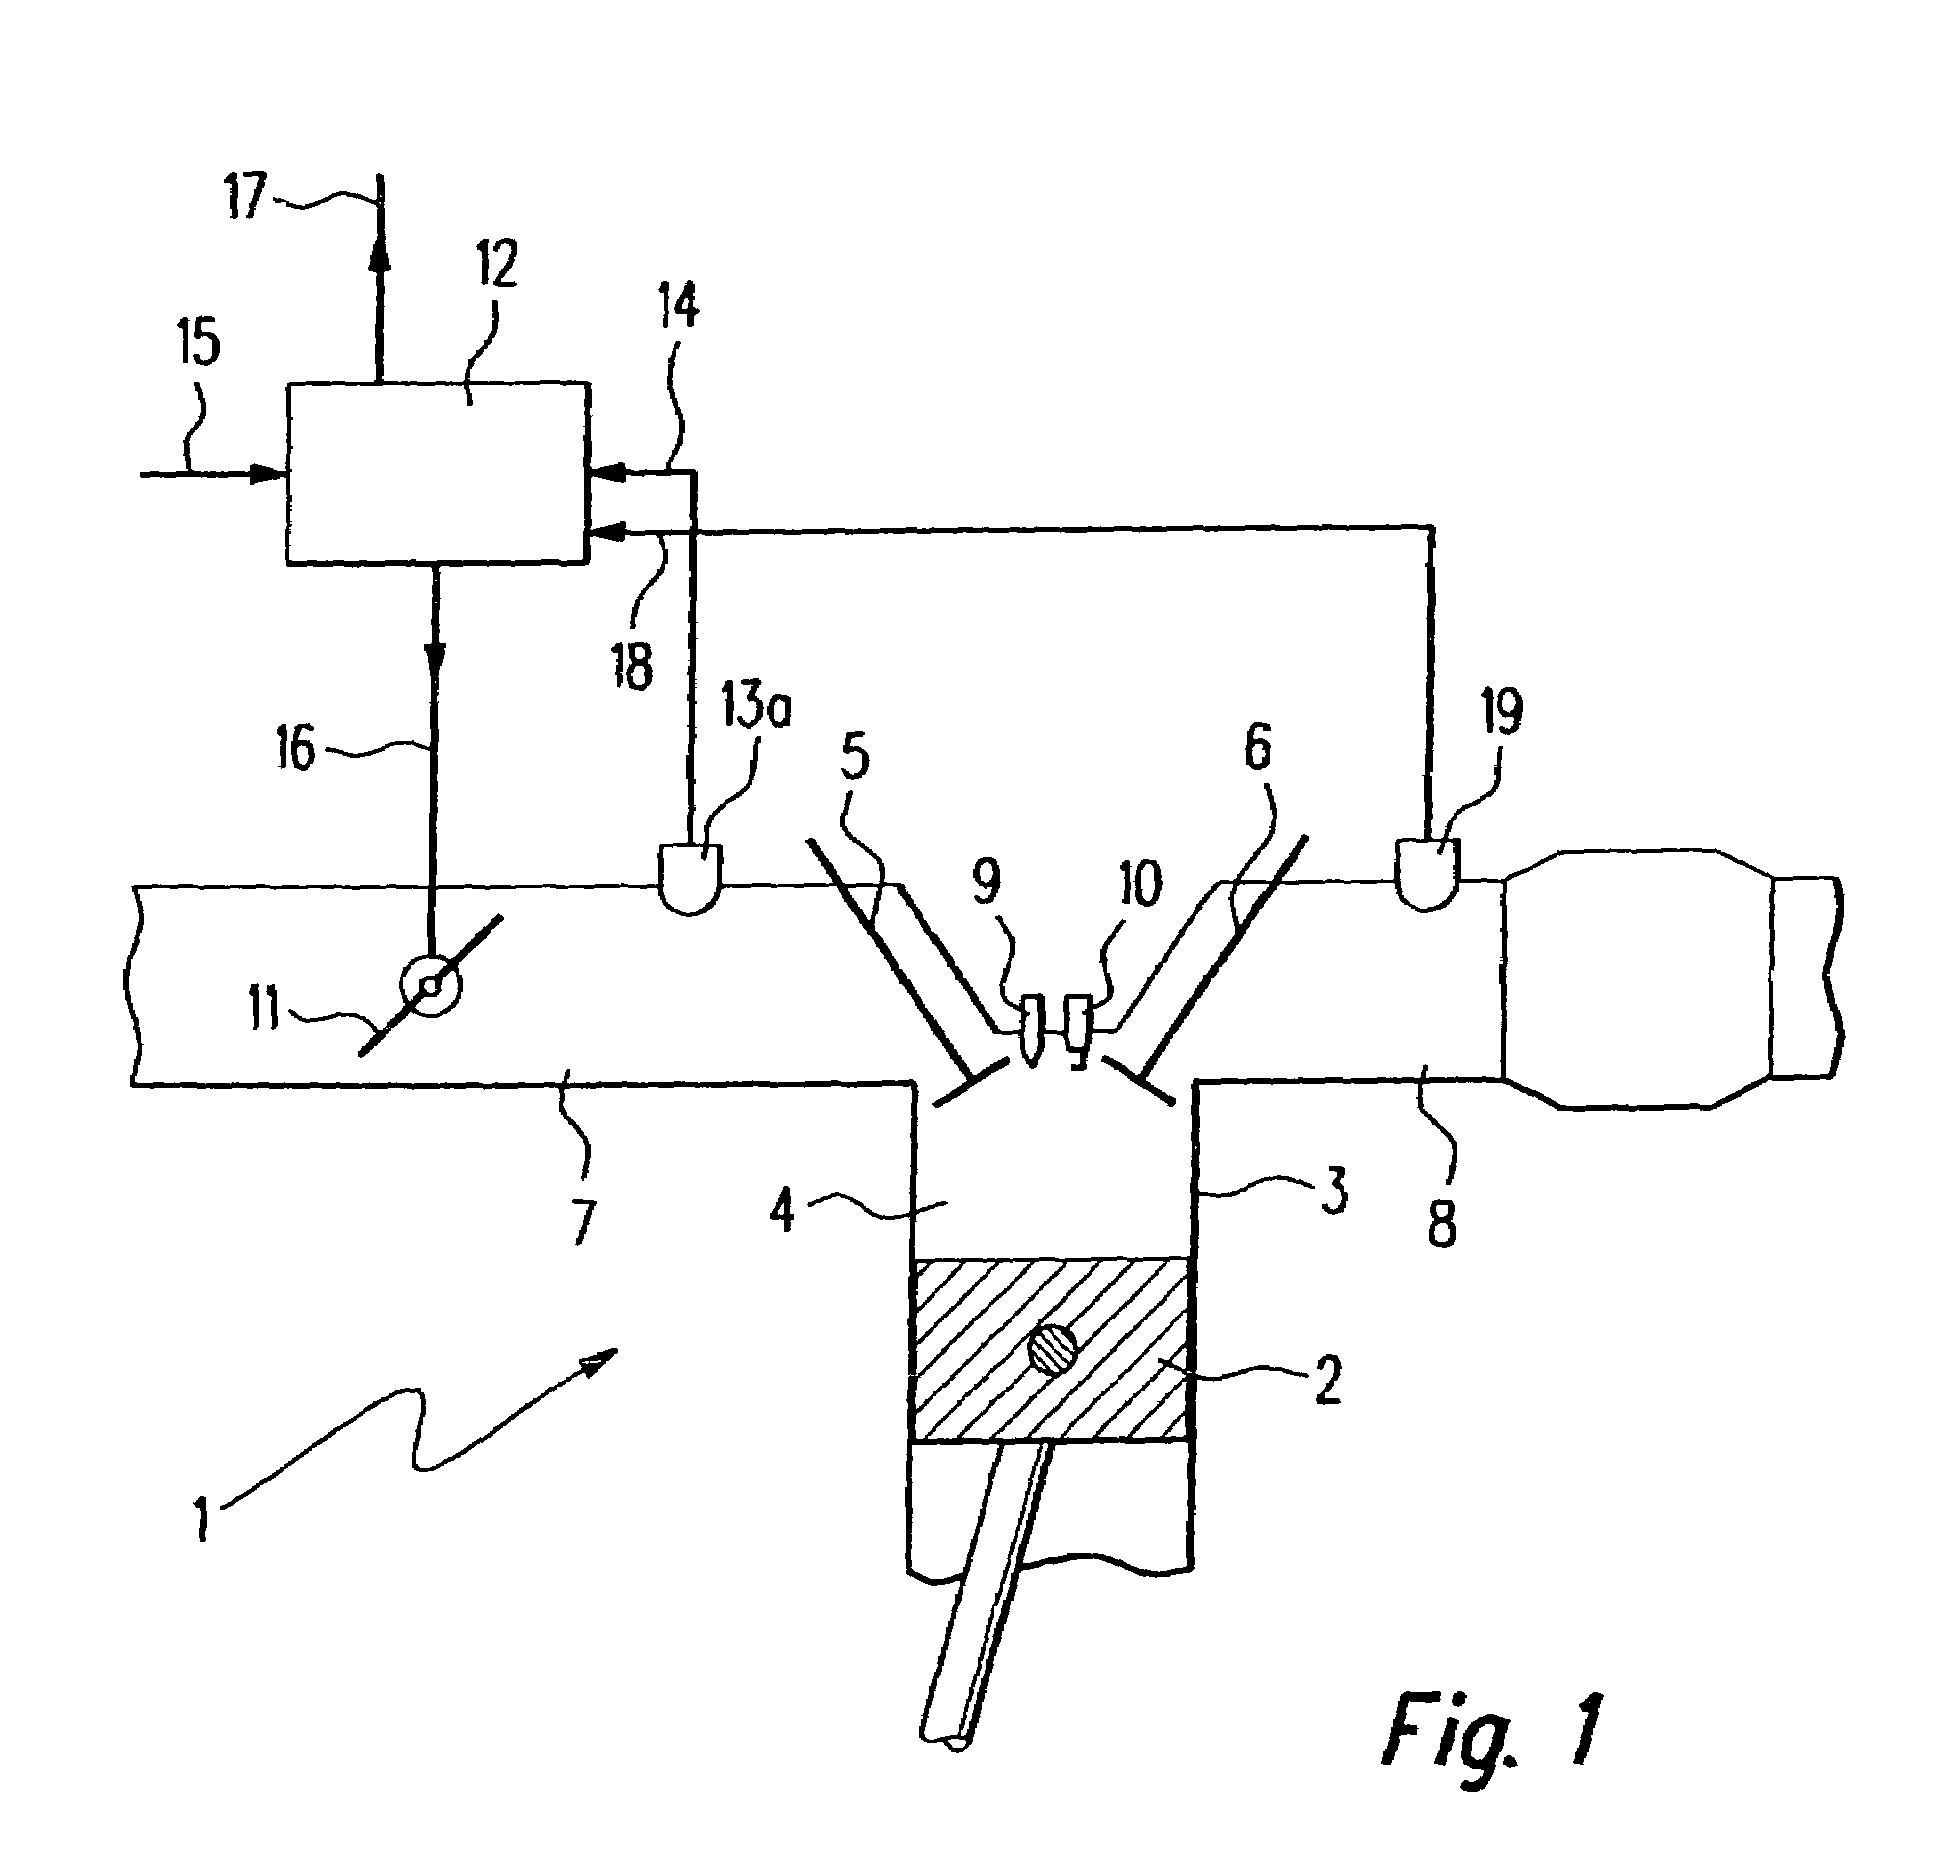 Method and device for monitoring the direction of rotation of a piston engine